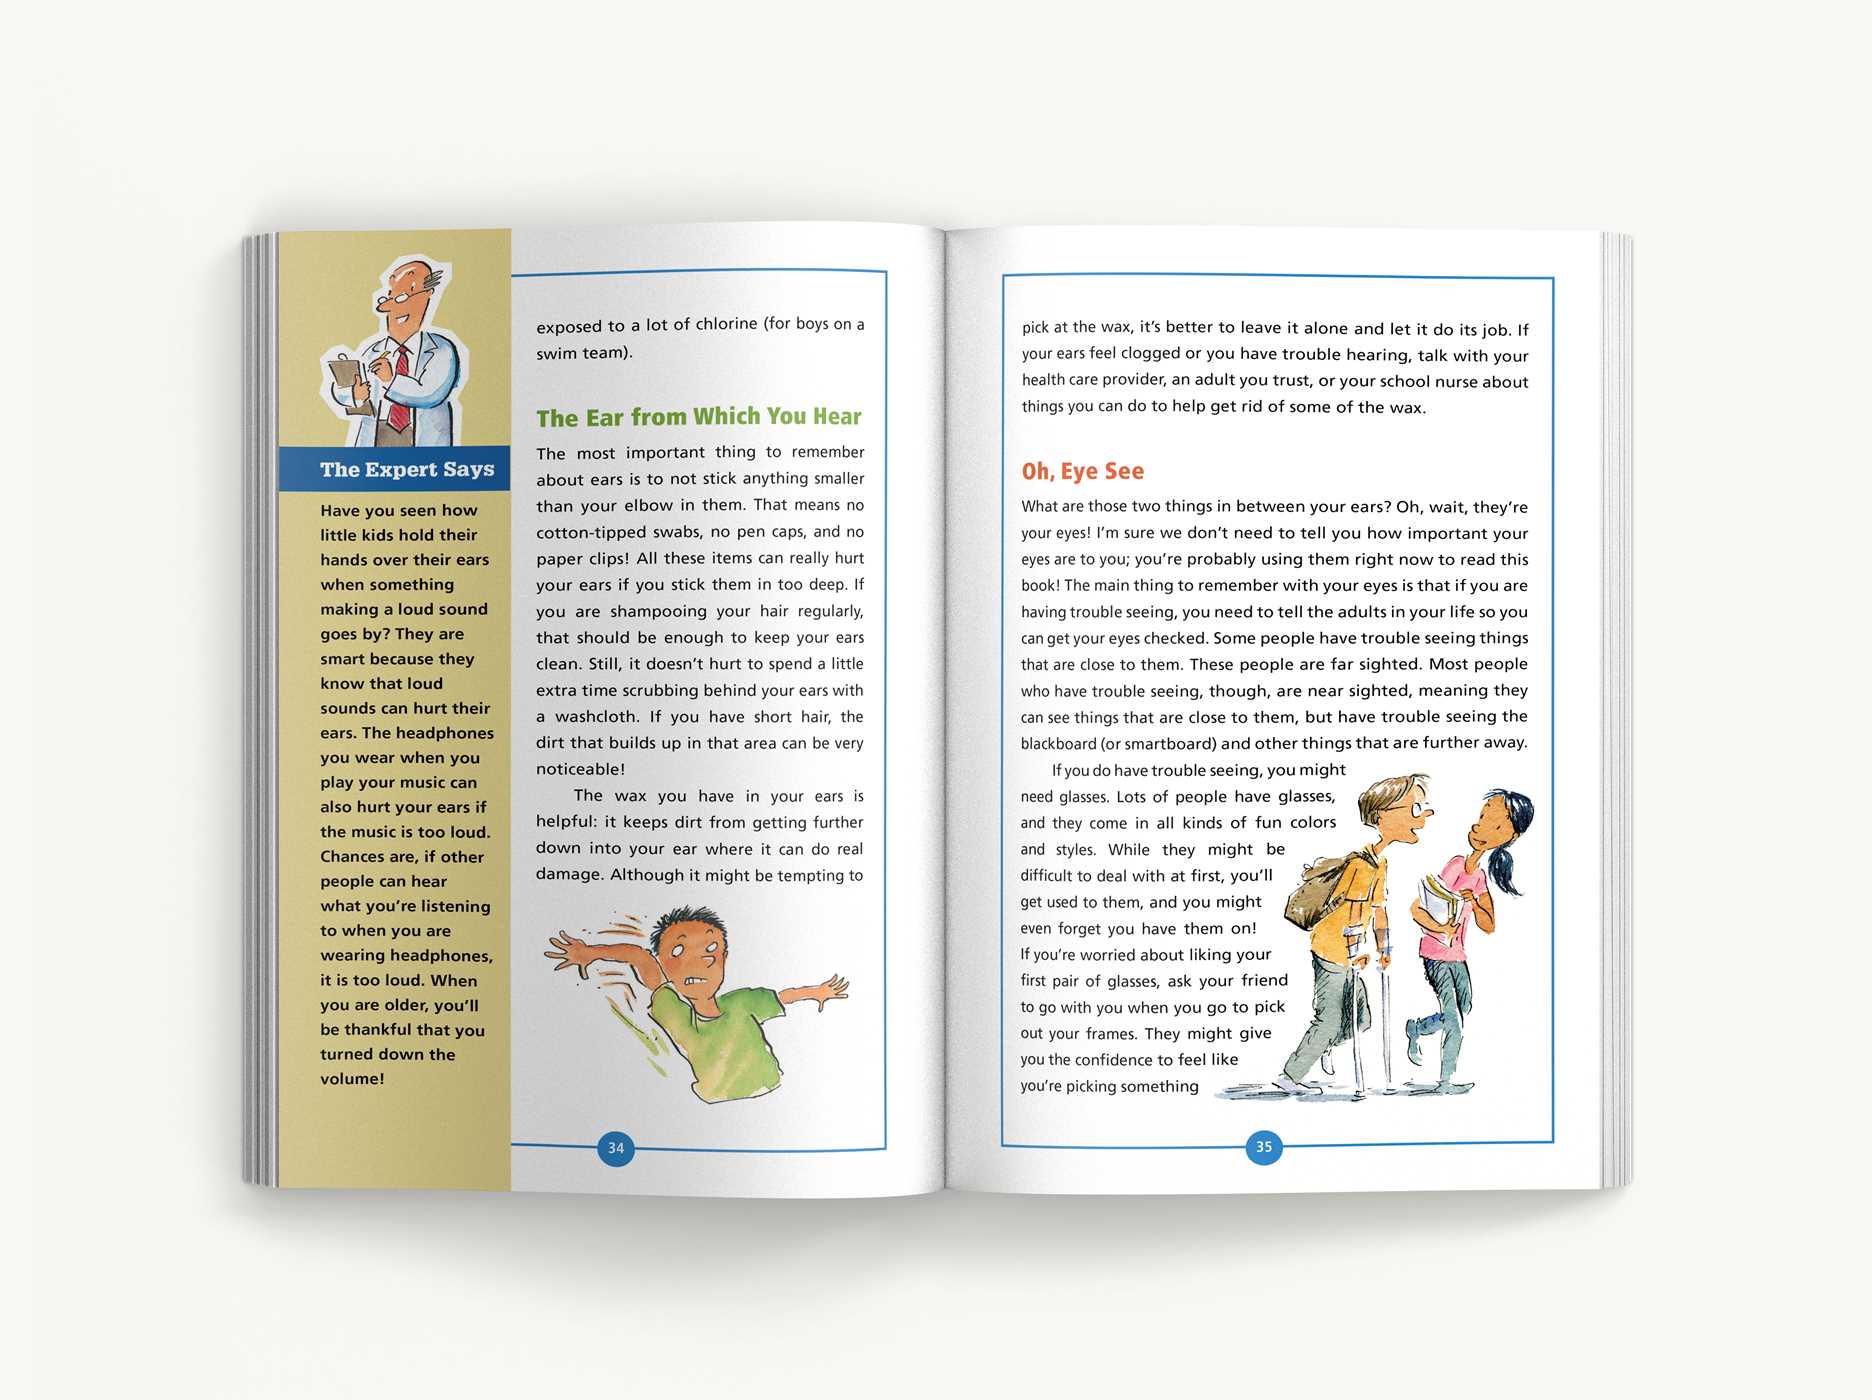 Talking puberty with boys - A look in the book - Guy Stuff, the body book  for boys 